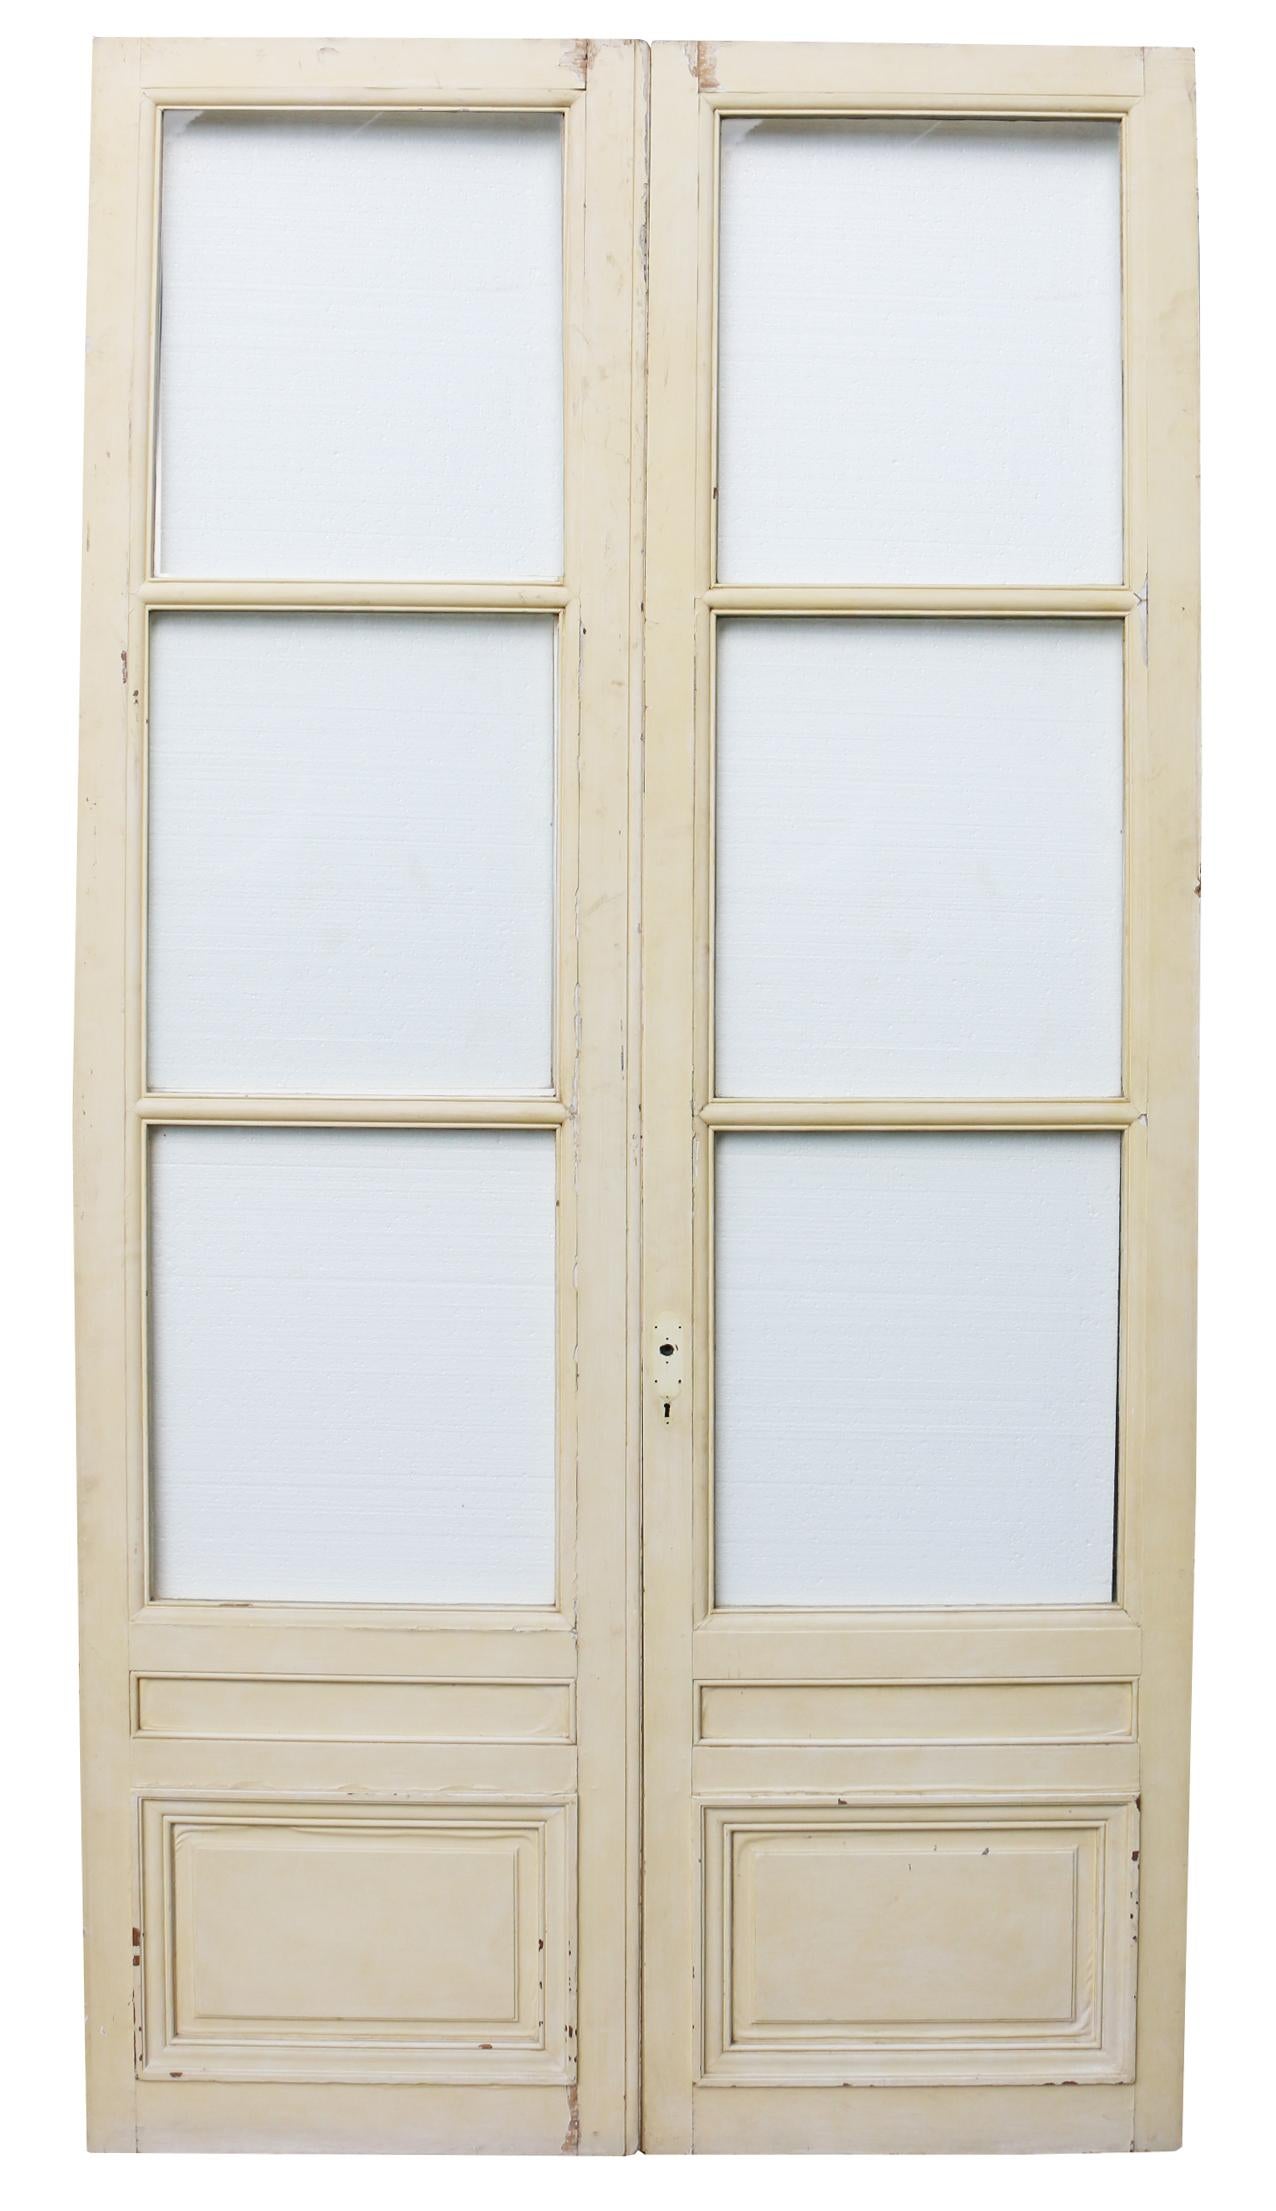 About

These impressive large doors are in original condition, they have been made from pine and are single glazed.

Condition report

Very good overall condition. Paint has chips and scratches. There are areas of blistered paint around the